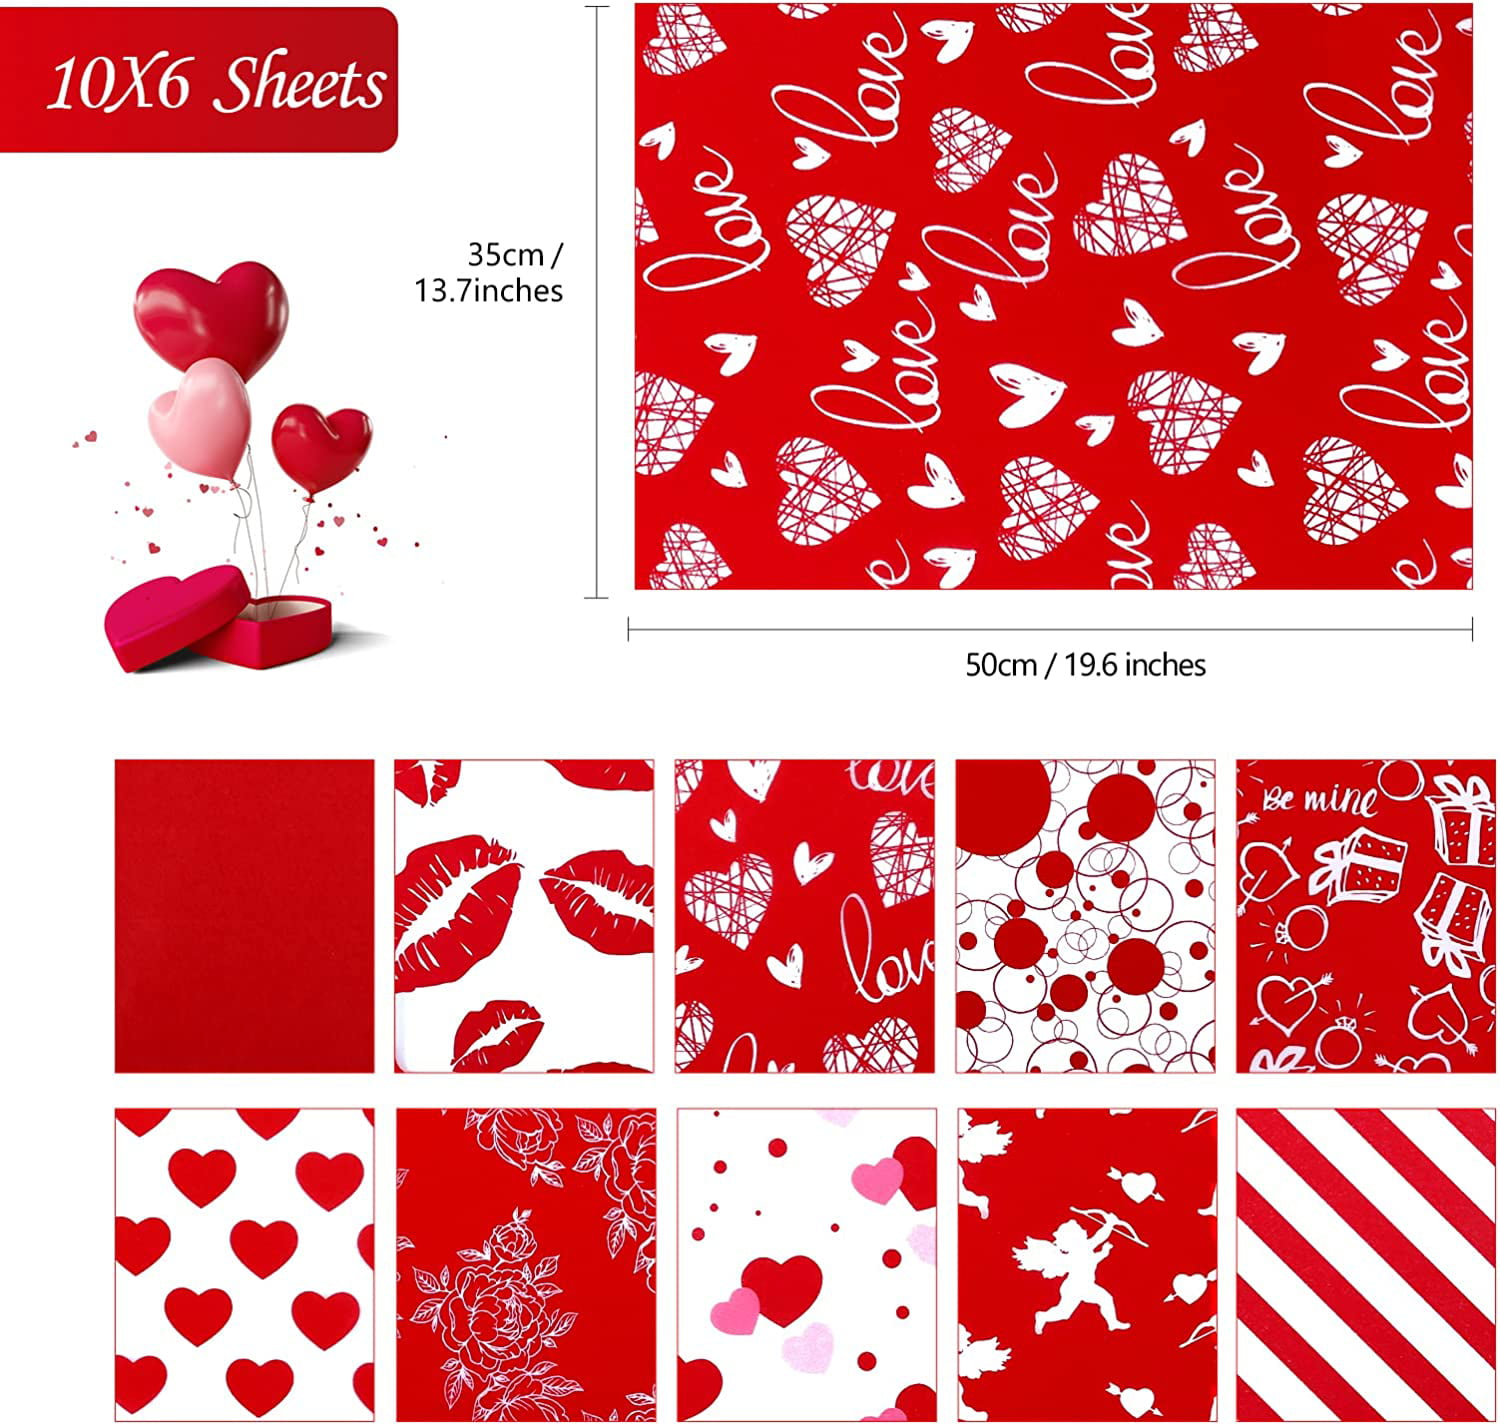  SANNIX 100 Sheets Valentine's Day Tissue Paper Bulk Gift  Wrapping Paper for Gift Wrapping Boxes DIY Crafts Birthday Holiday Wedding  Party Decoration 19.7 ×13.8 Inch (10 Patterns) : Health & Household